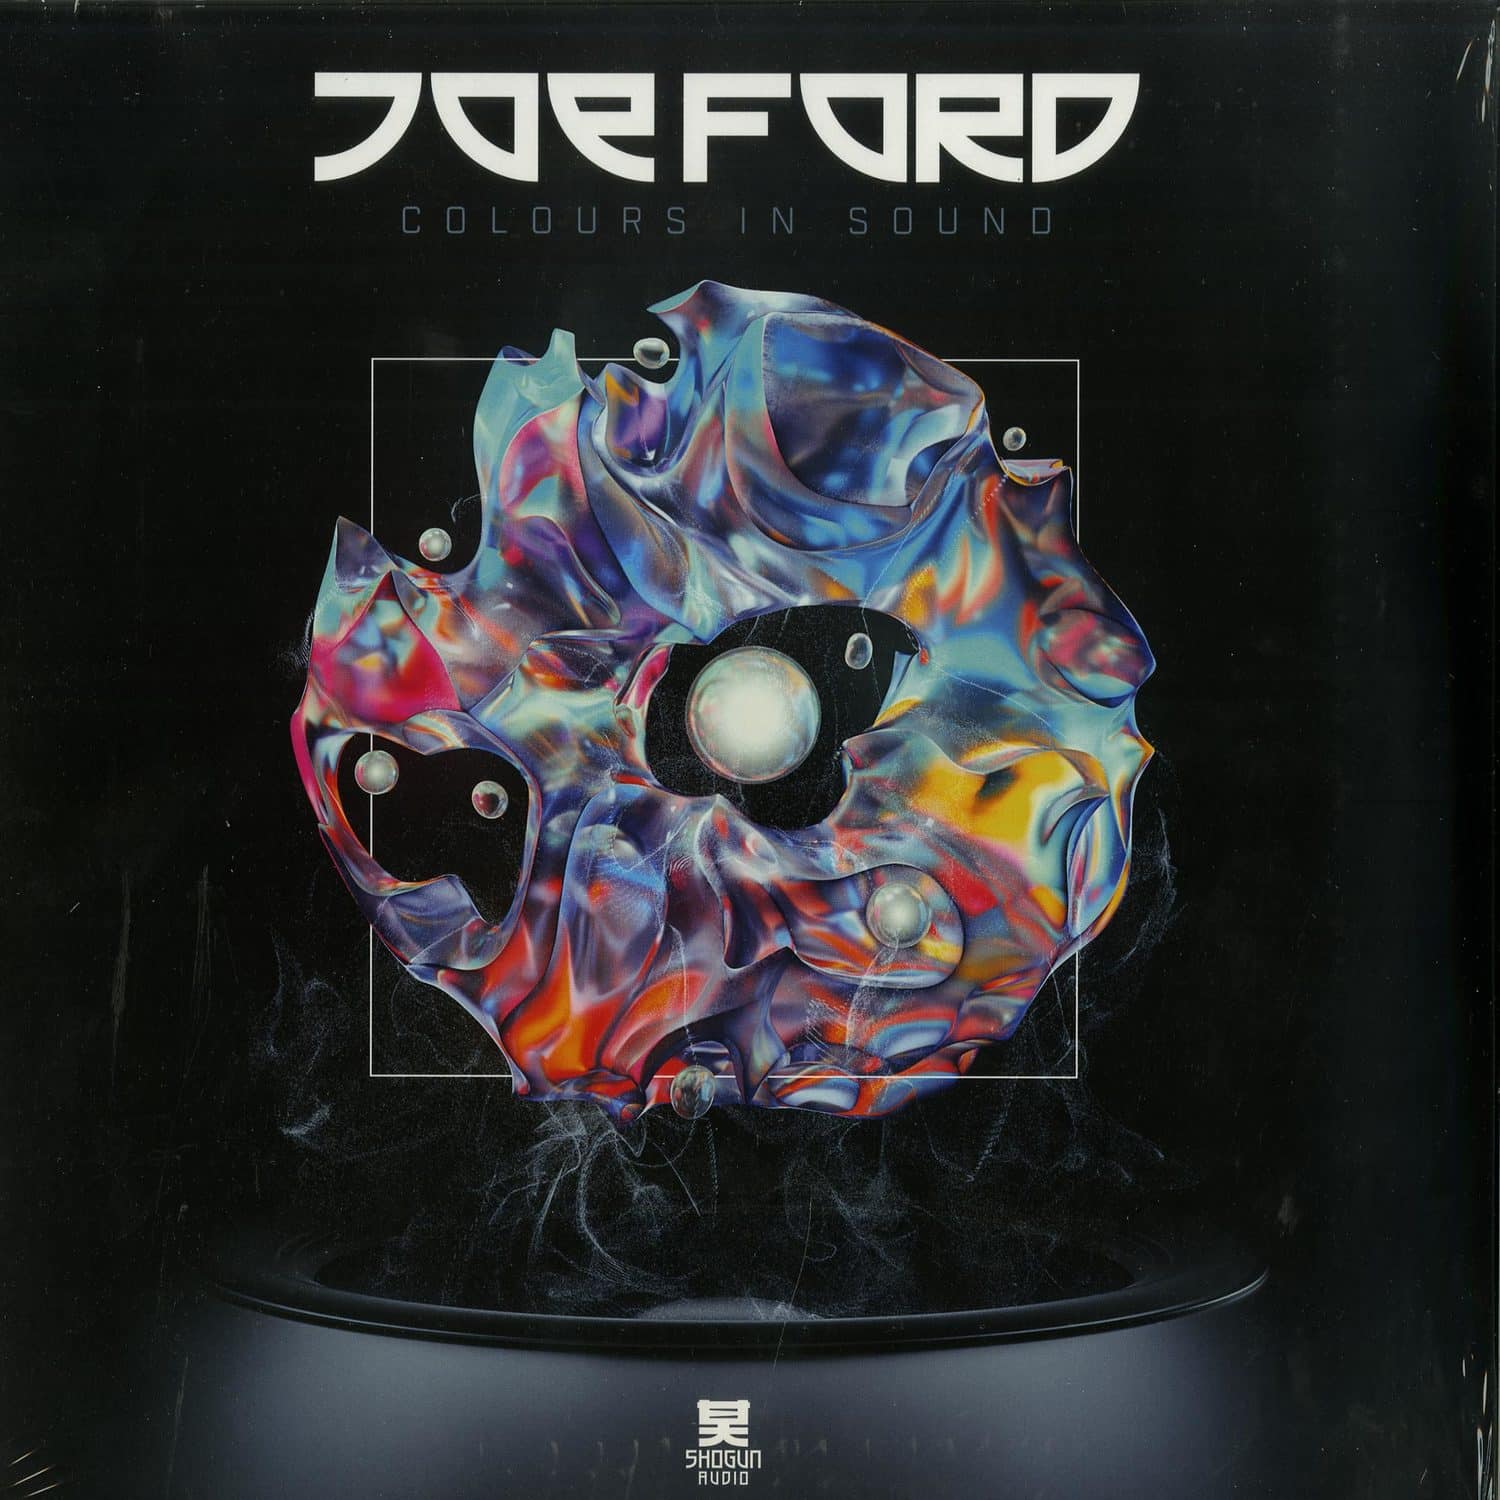 Joe Ford - COLOURS IN SOUND  